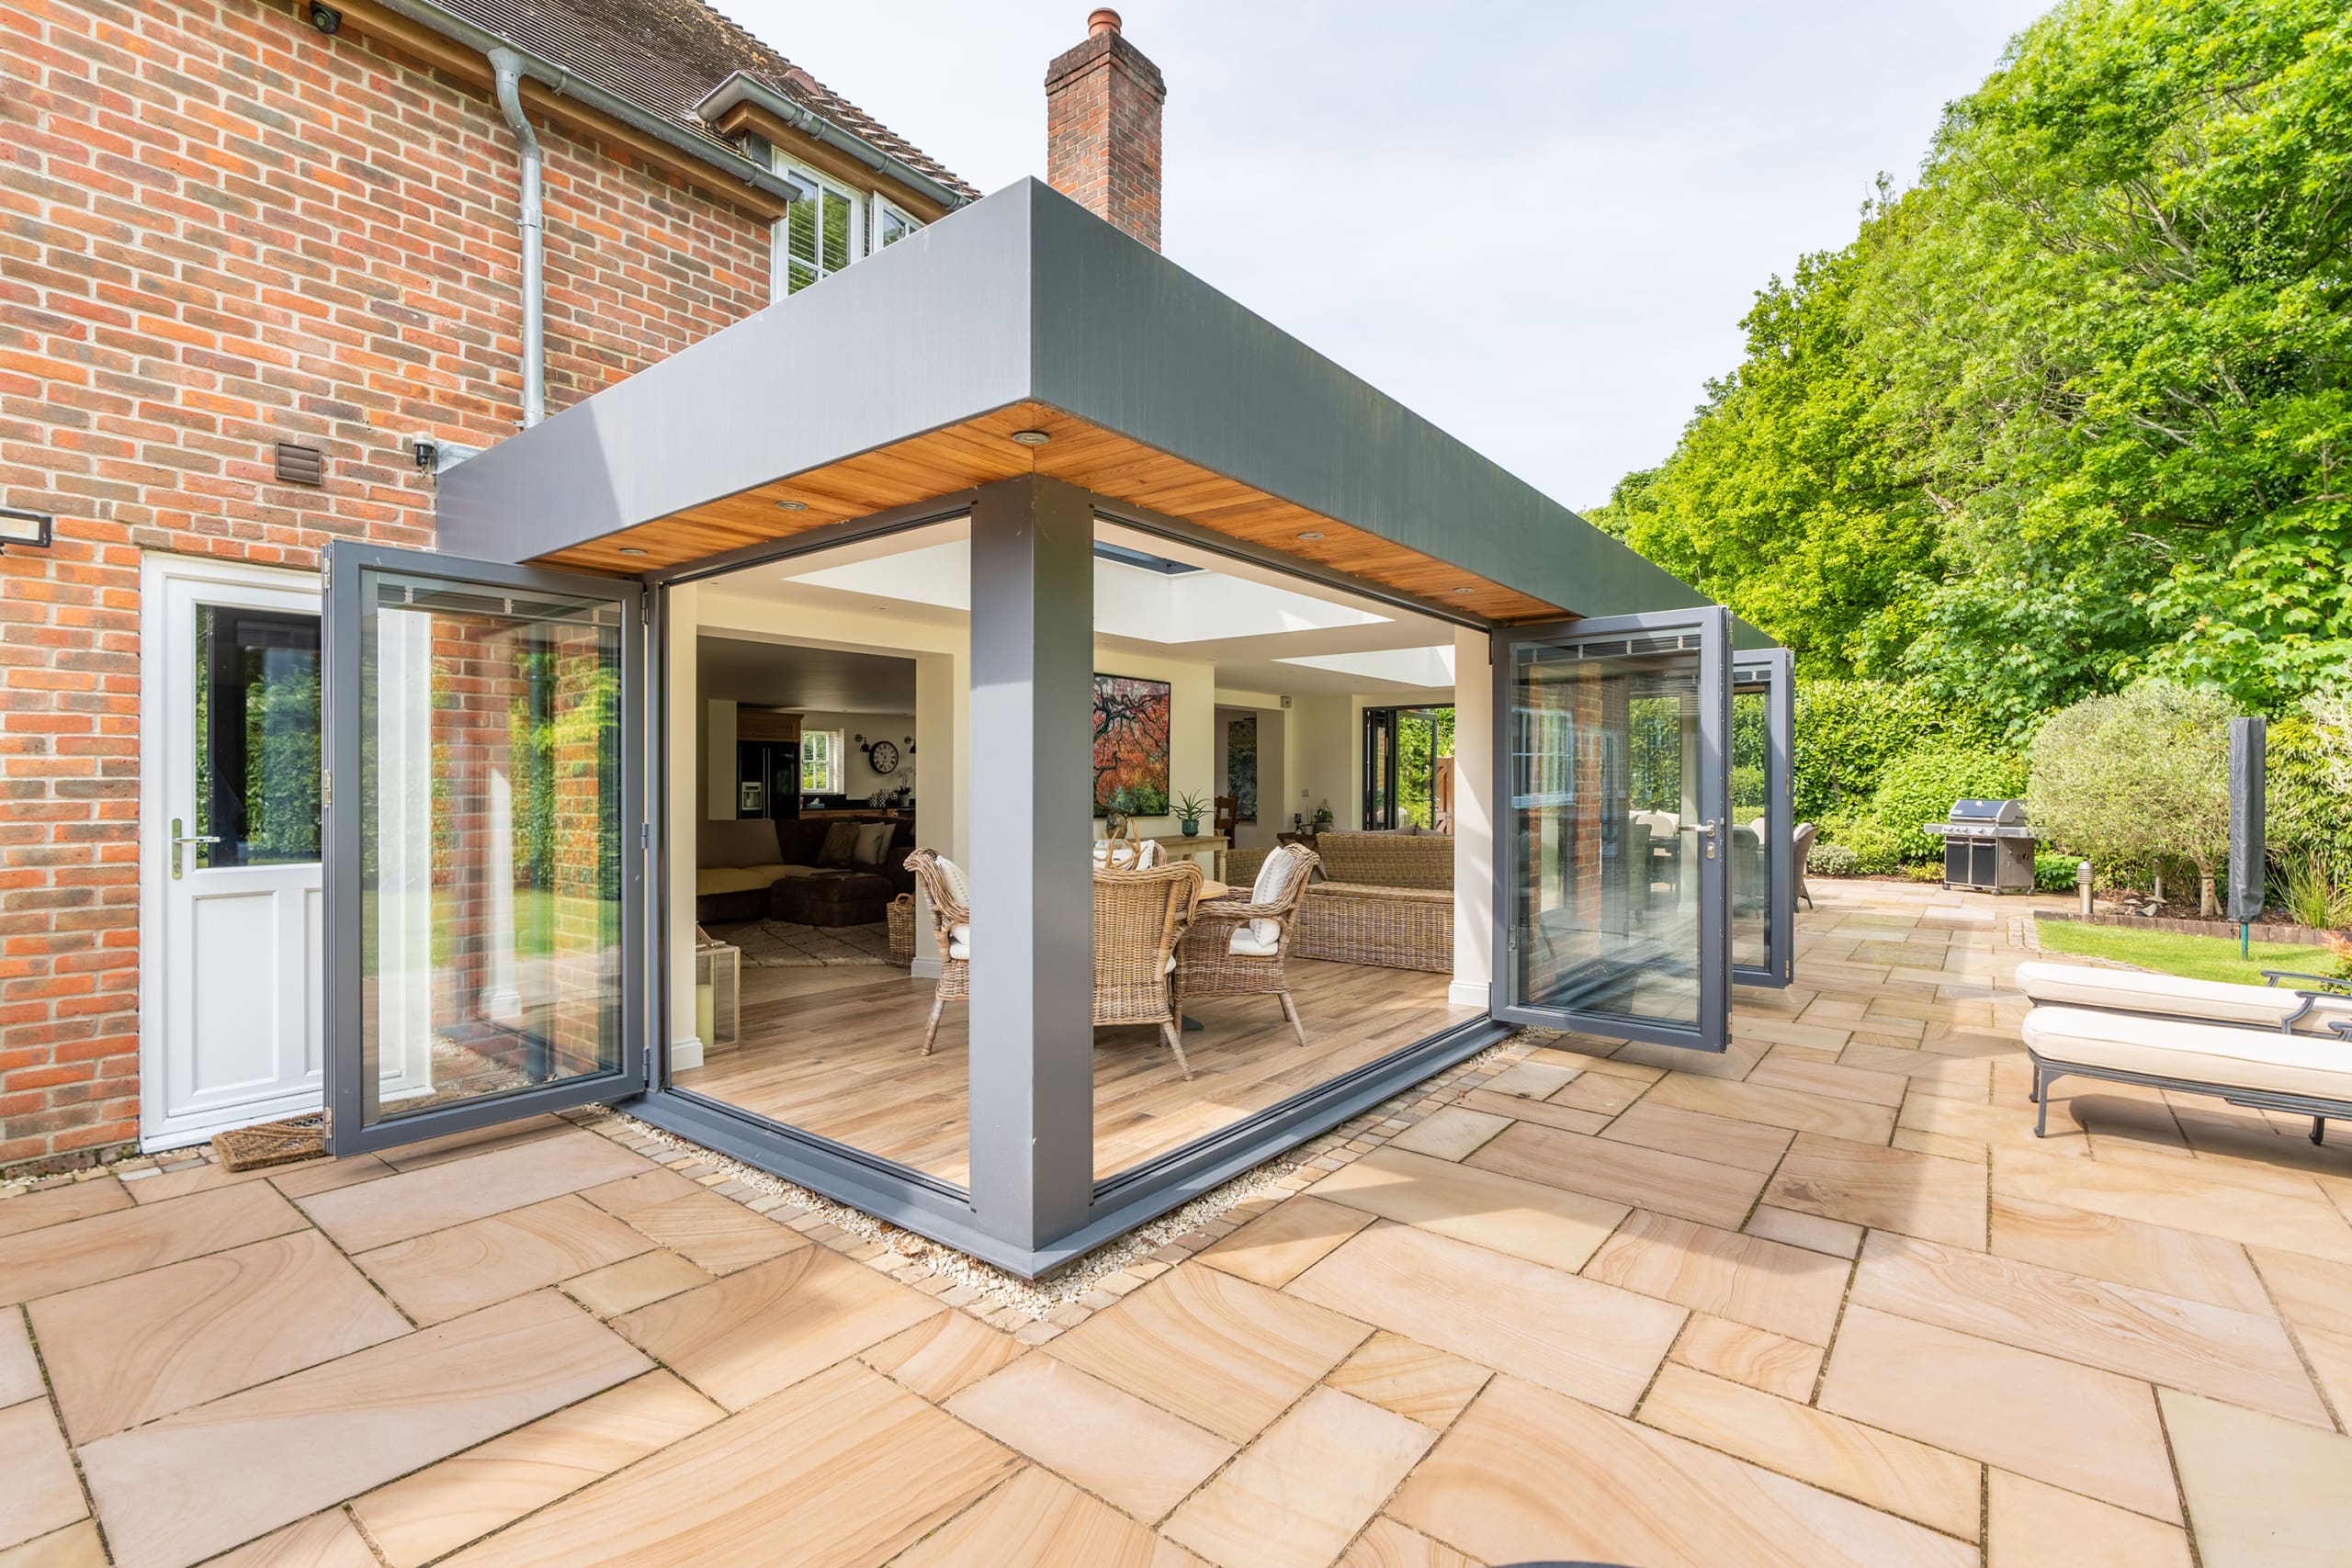 Exterior of an orangery with bifolding doors and roof lantern.